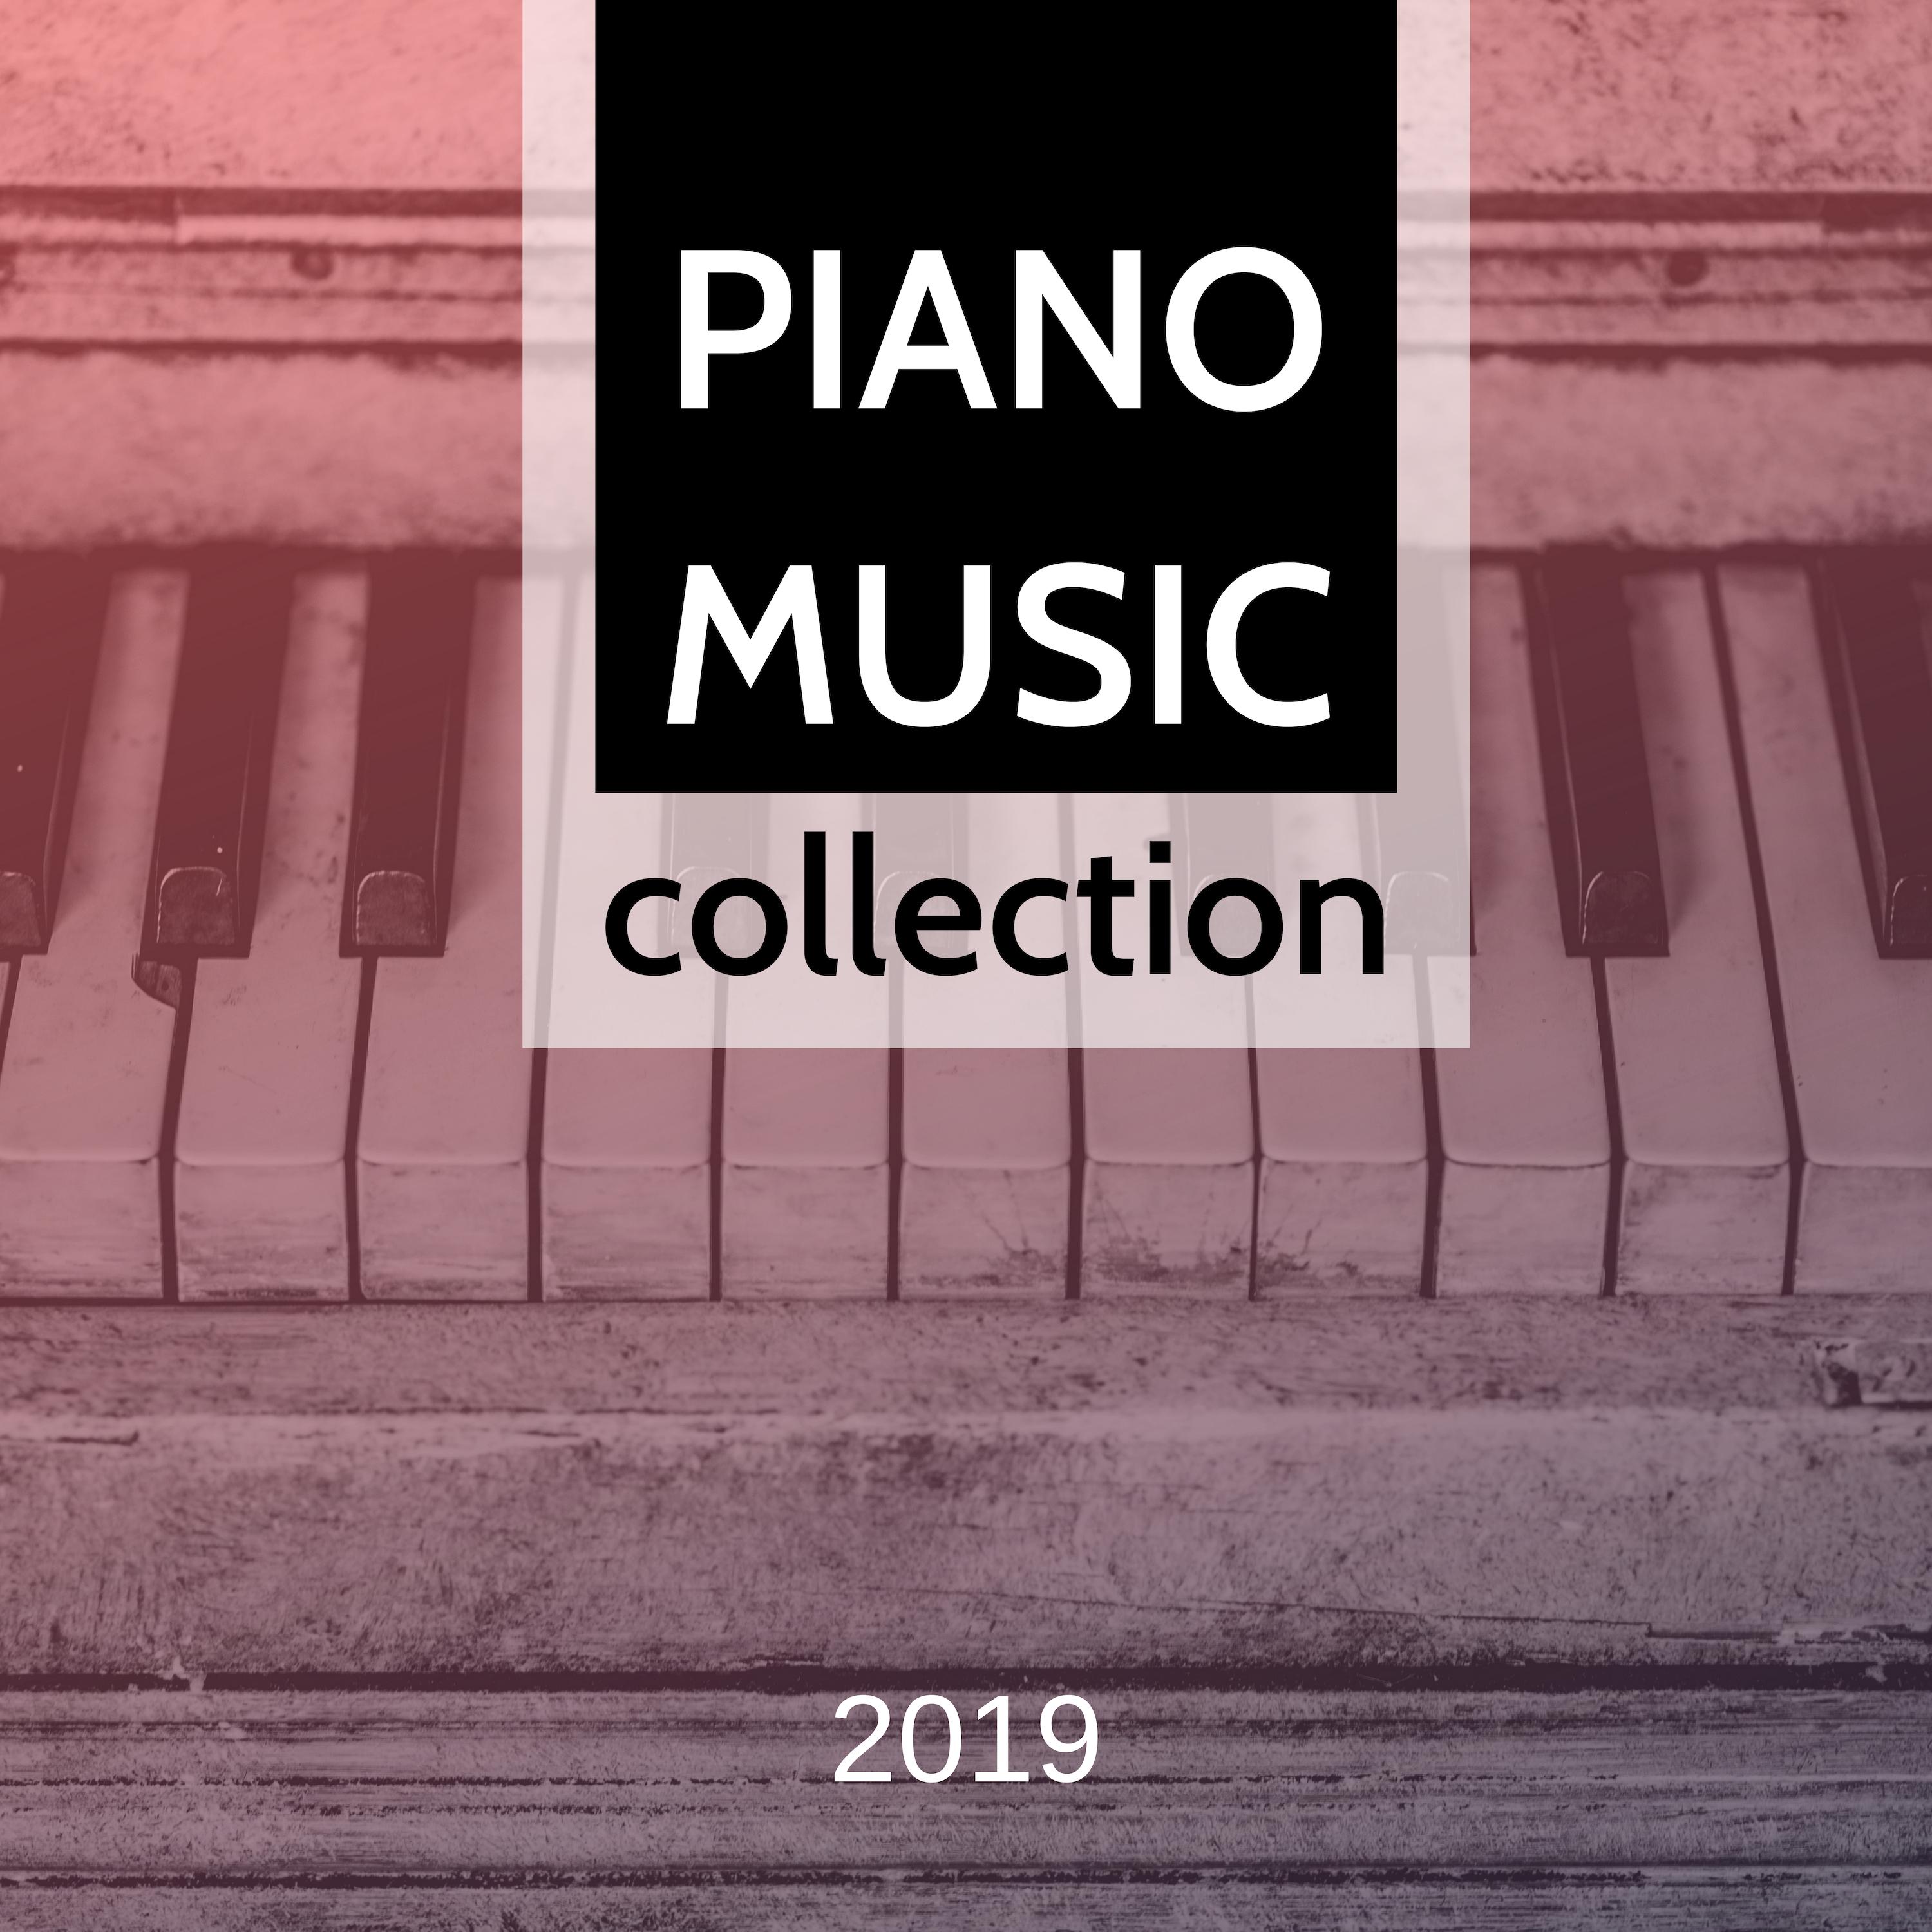 Piano Music Collection 2019: Studying, Reading, Focusing, Working, Enhancin your Concentration